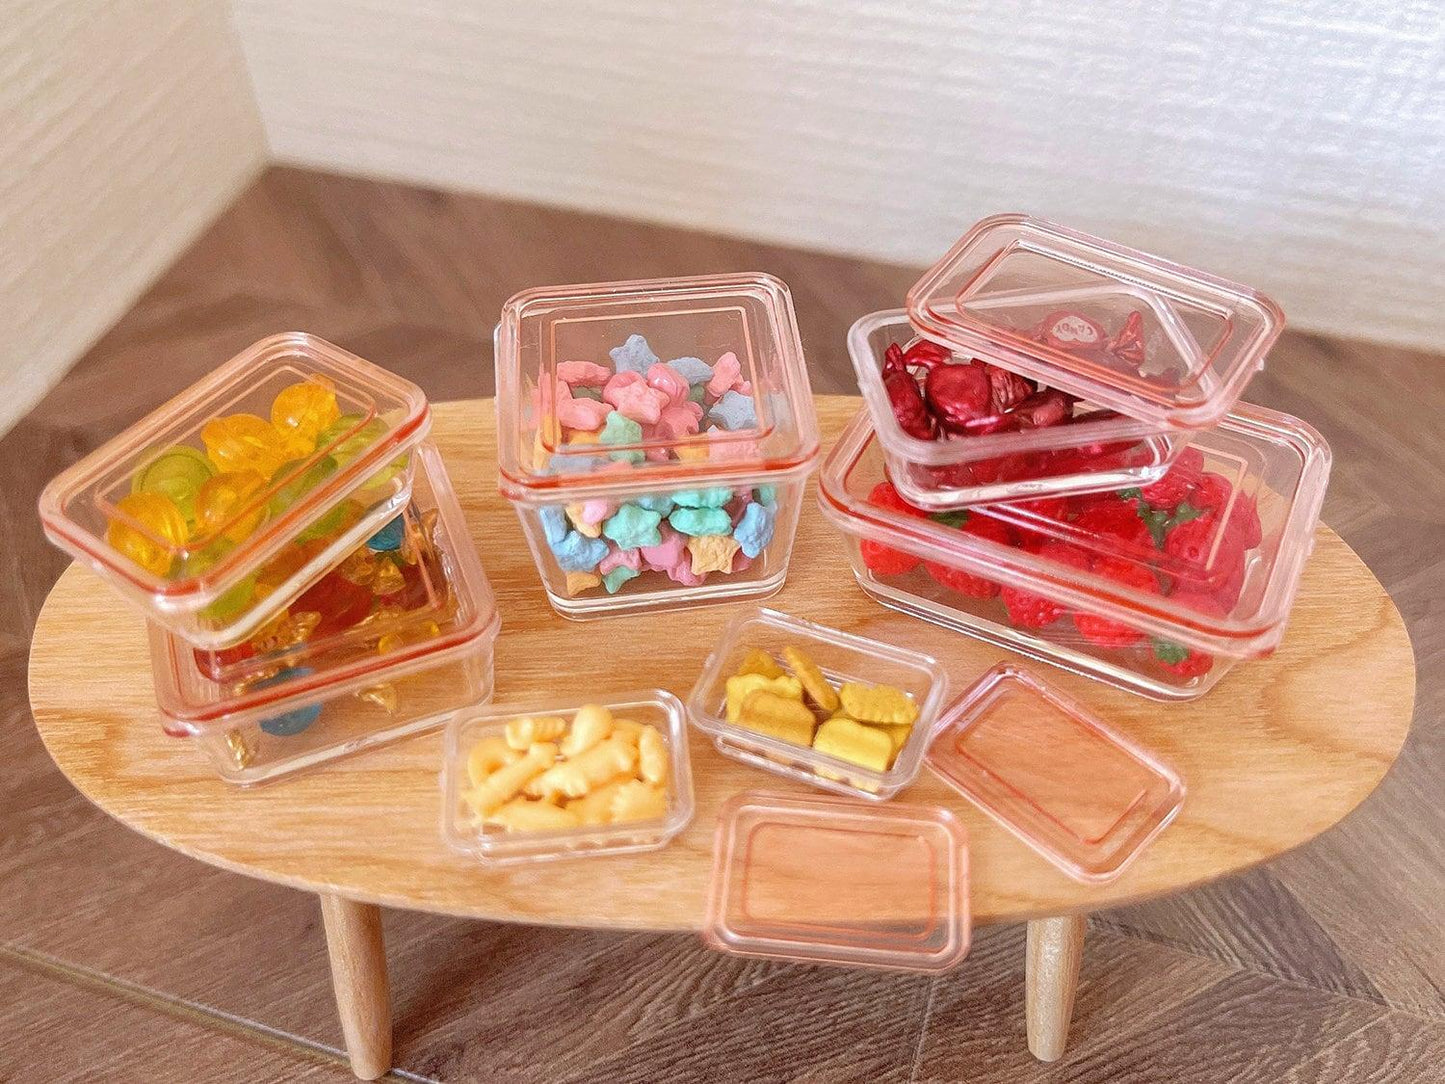 Miniature Fruits Storage Containers - Set of 9 Containers - Fresh Keeping Box - Mini Storage Box With Lid - Dollhouse Miniature Accessories - Rajbharti Crafts